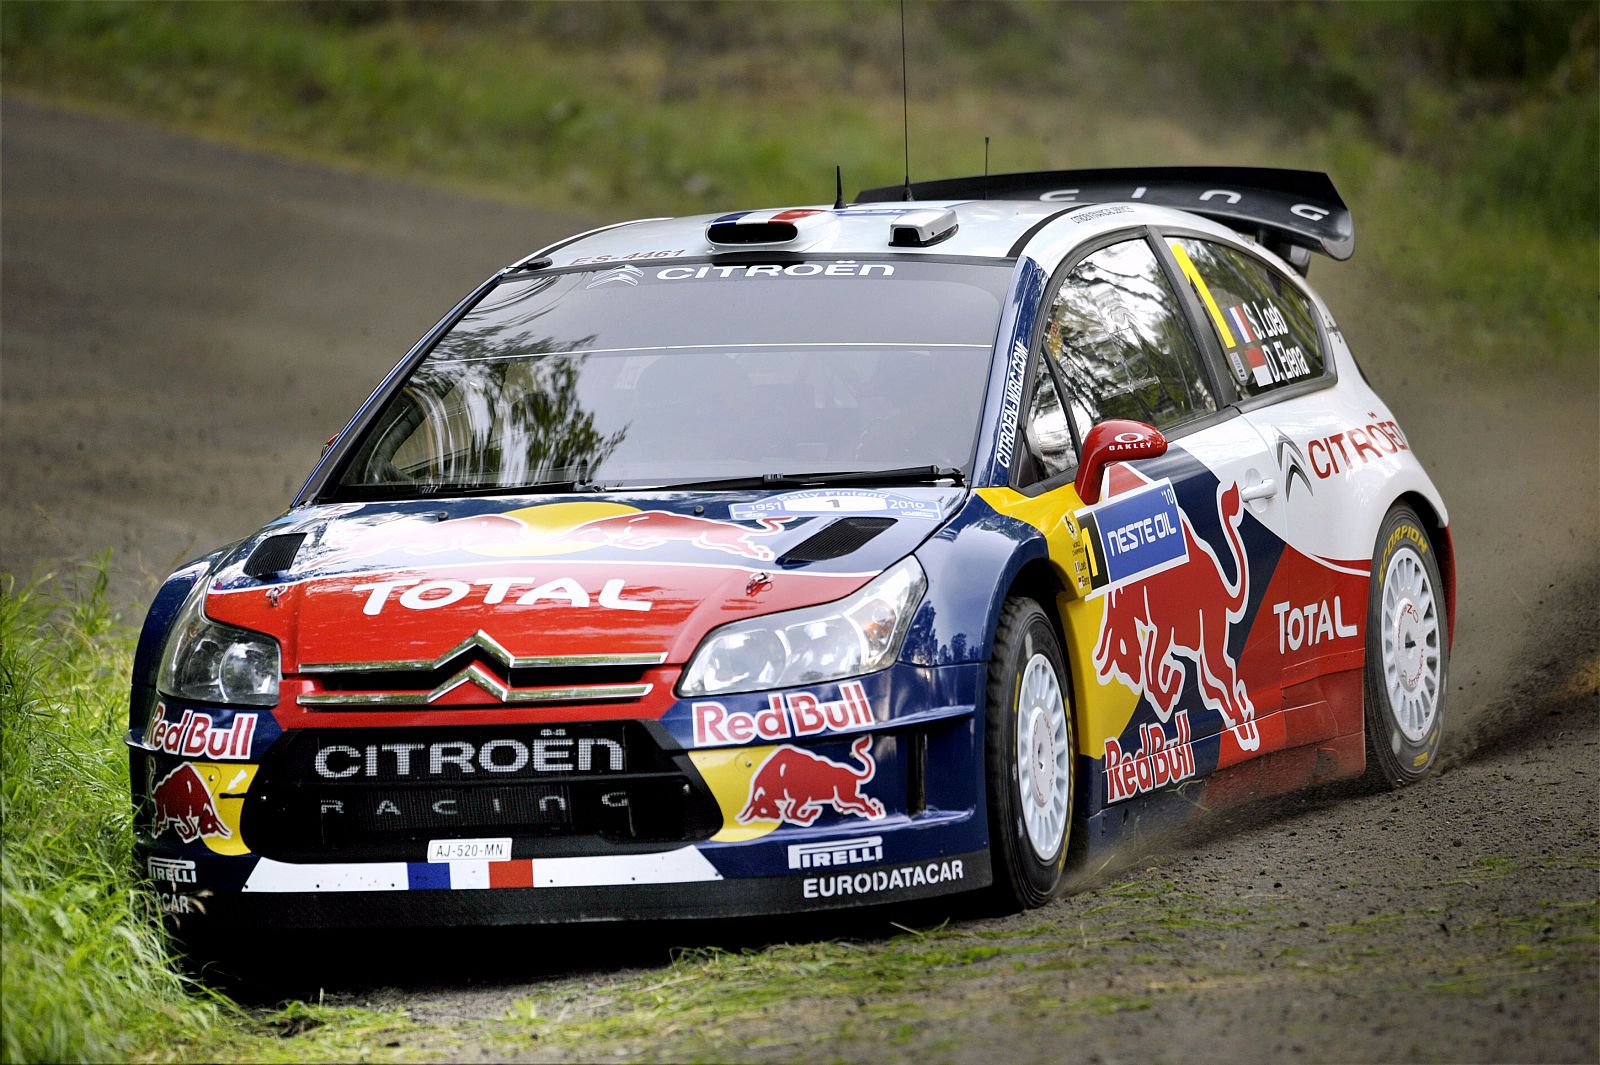 Reigning world champion Sebastien Loeb of France takes a corner with his Citroen C4 during the shakedown of Rally Finland 2010 in the eighth round of the FIA WRC World Rally Championship in Jyvaskyla